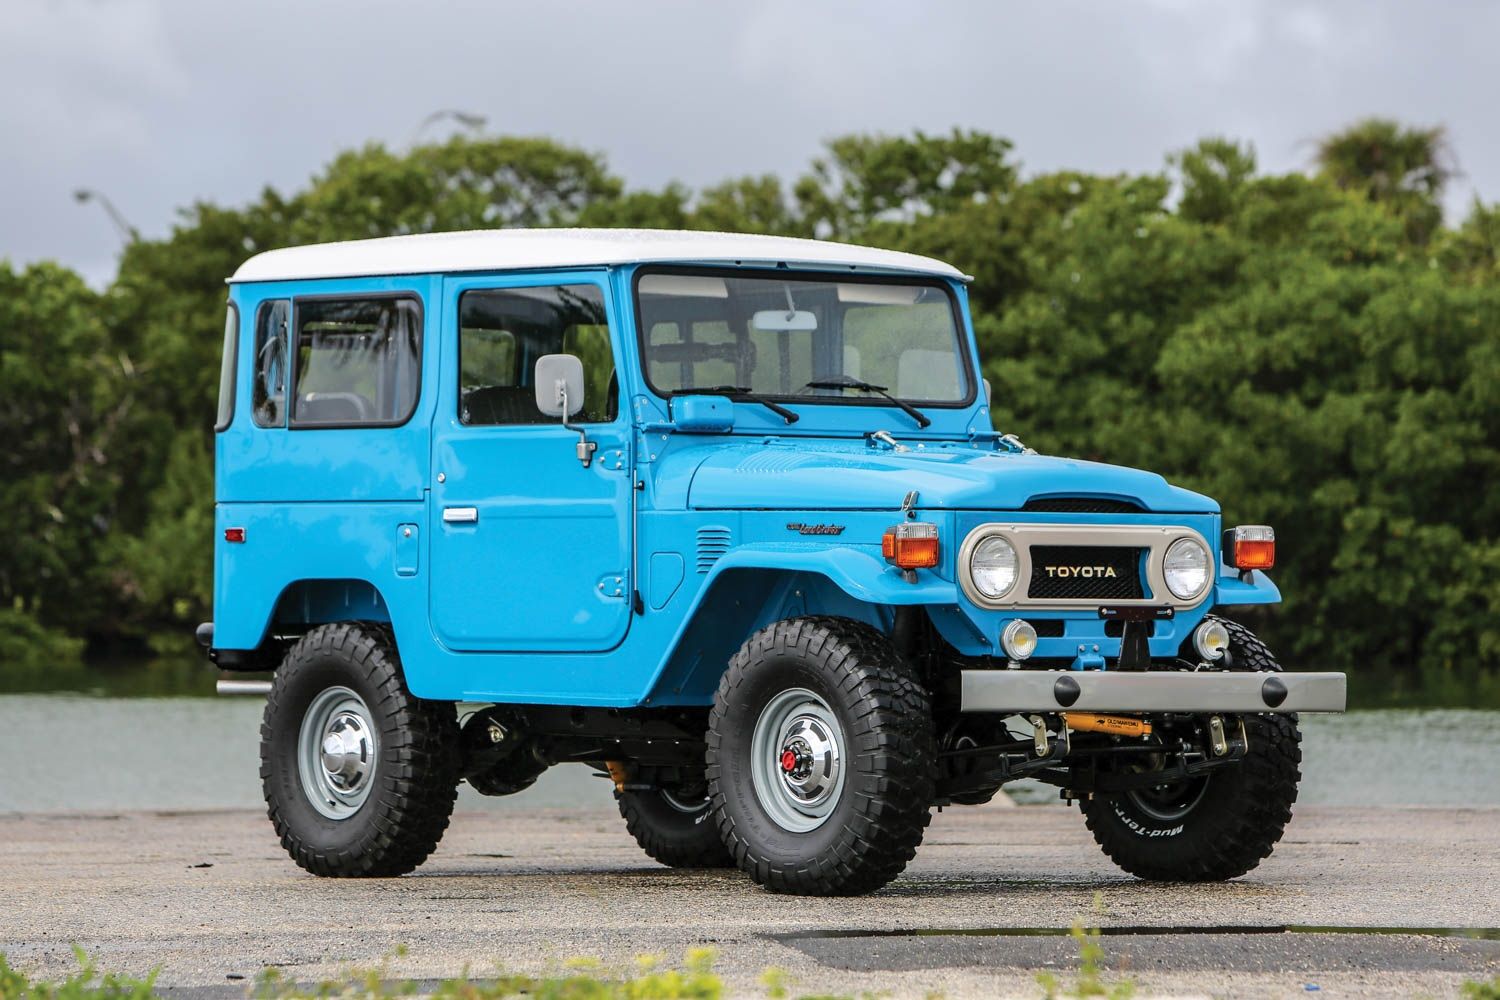 Land Cruiser FJ40 1970s In Blue viewed from front